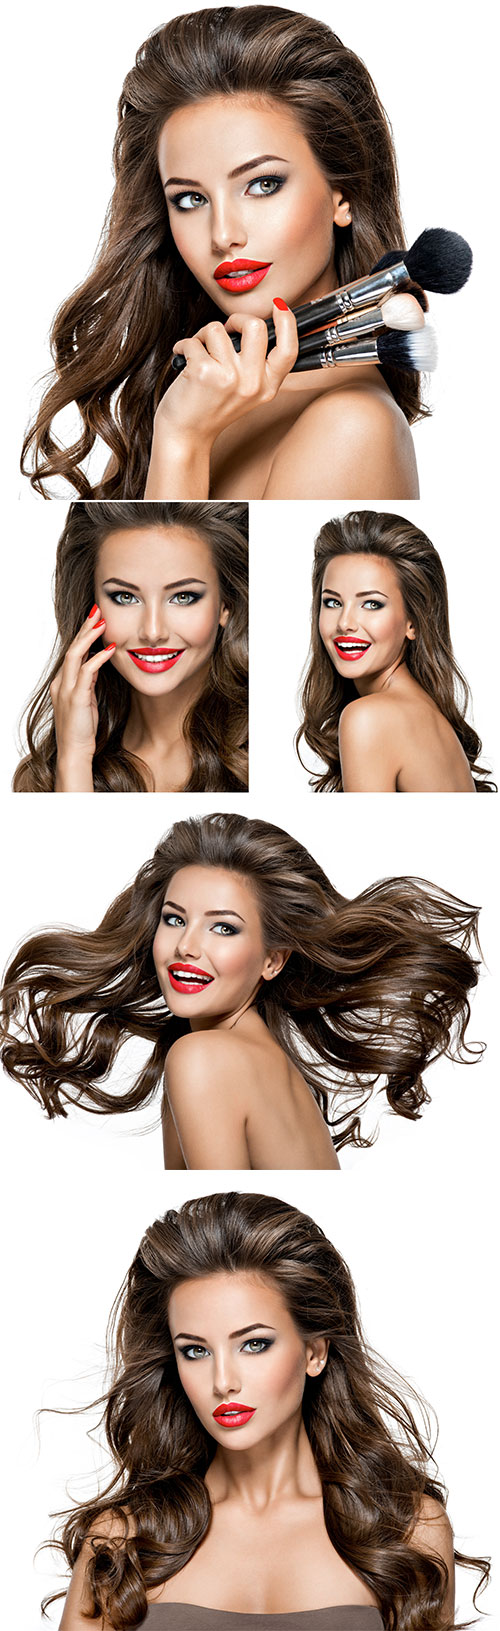 Luxury girl model with red lips and makeup brushes